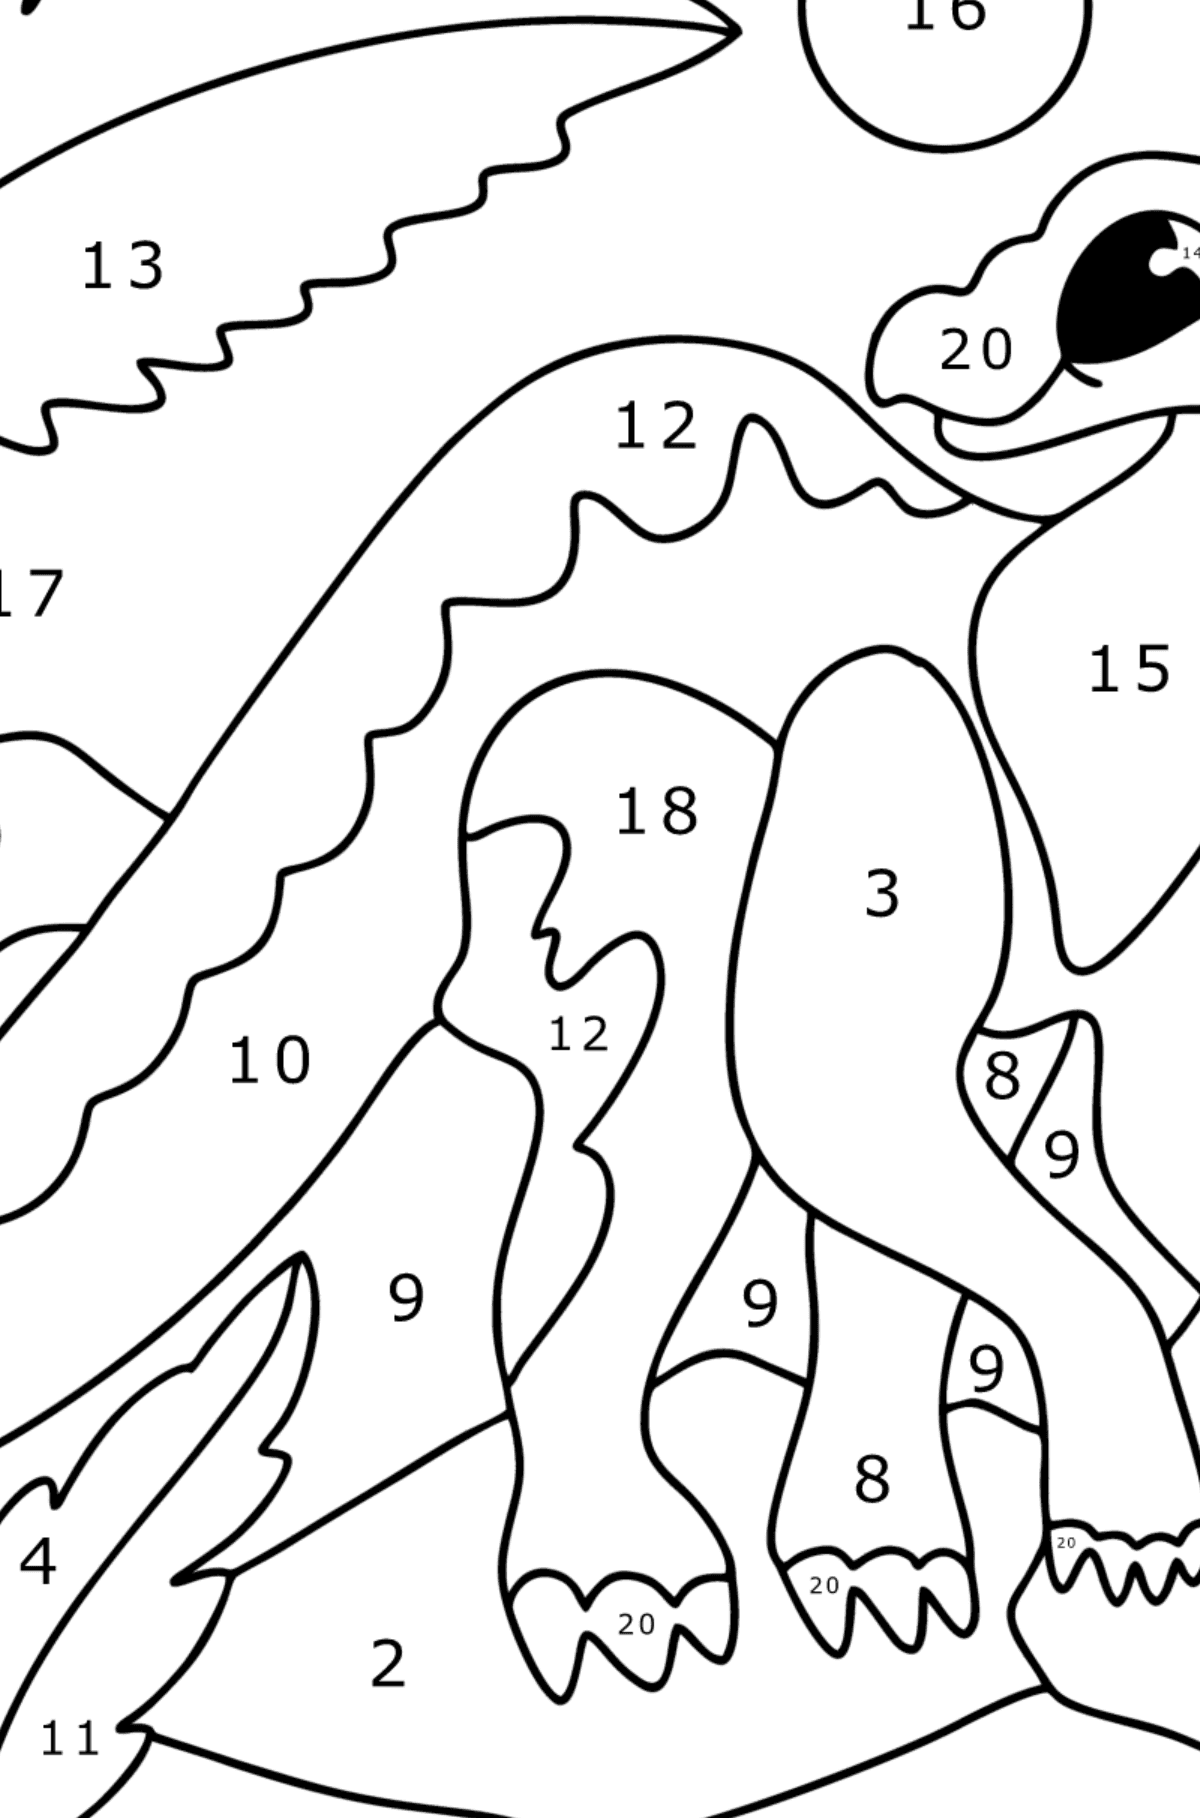 Iguanodon coloring page - Coloring by Numbers for Kids